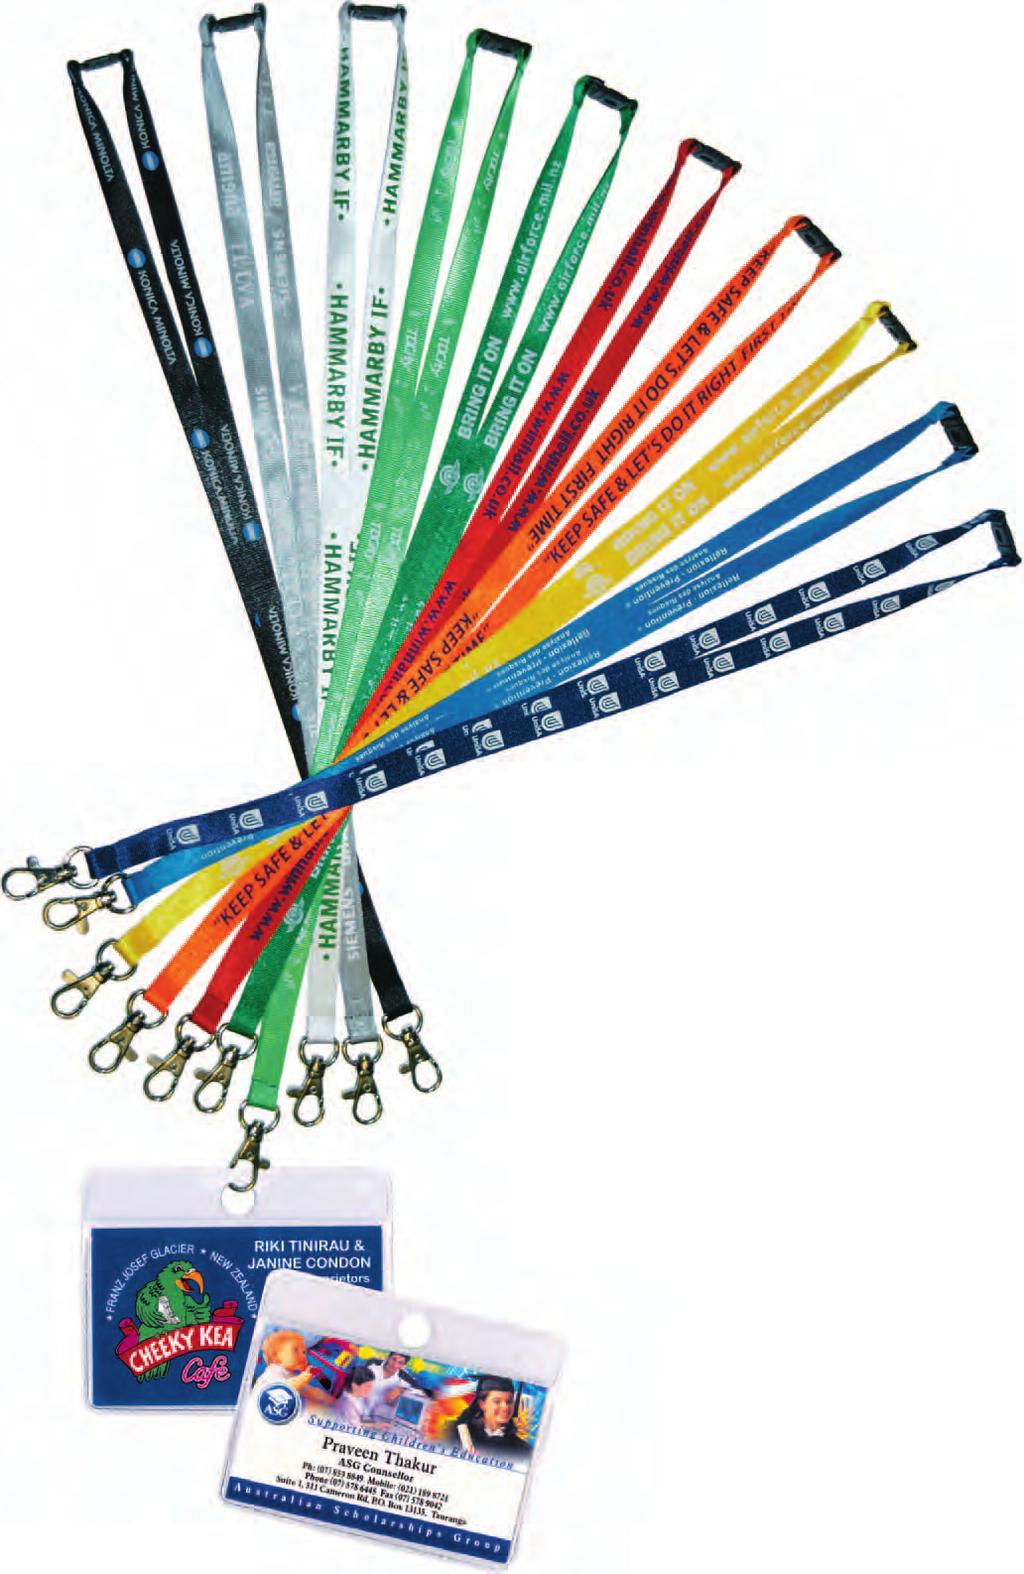 Lanyards A necessity for Conference, Shows, Events and reunions.